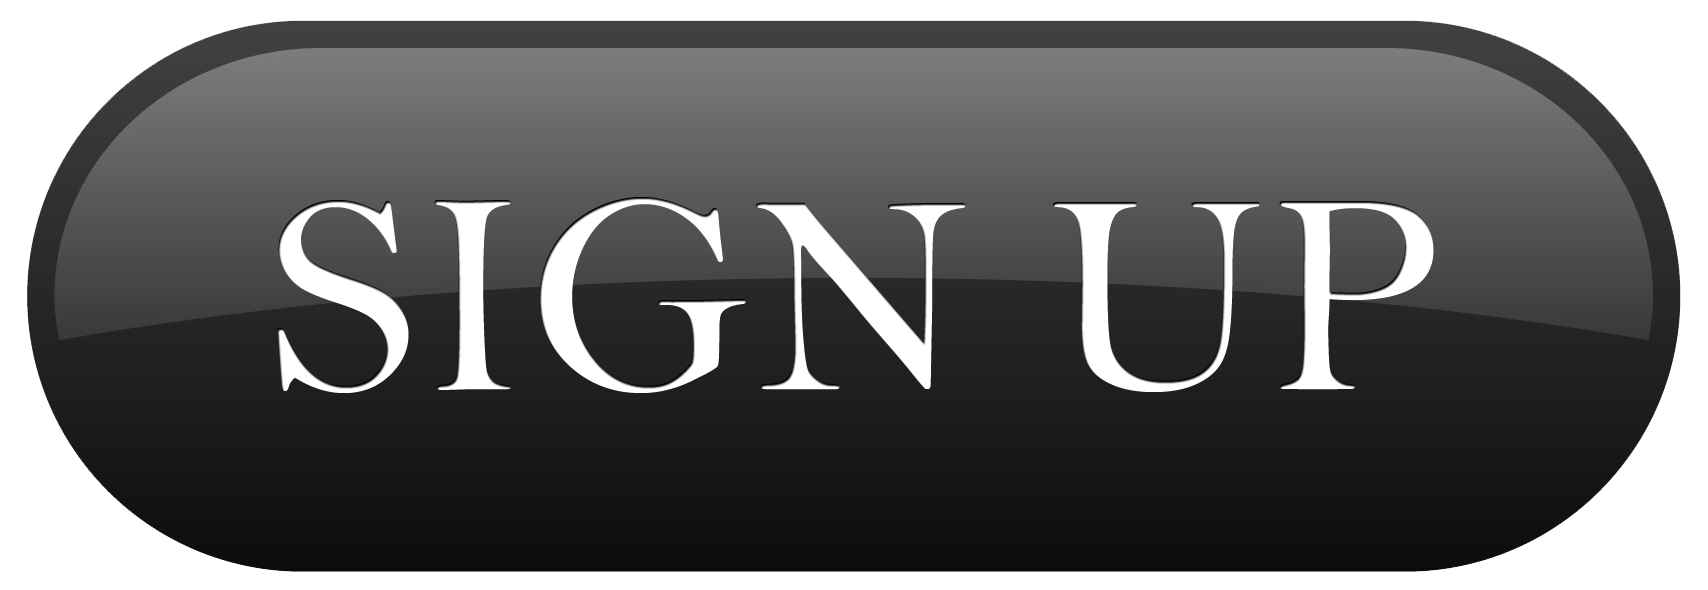 Sign Up Button PNG Transparent Sign Up Button.PNG Images. | PlusPNG